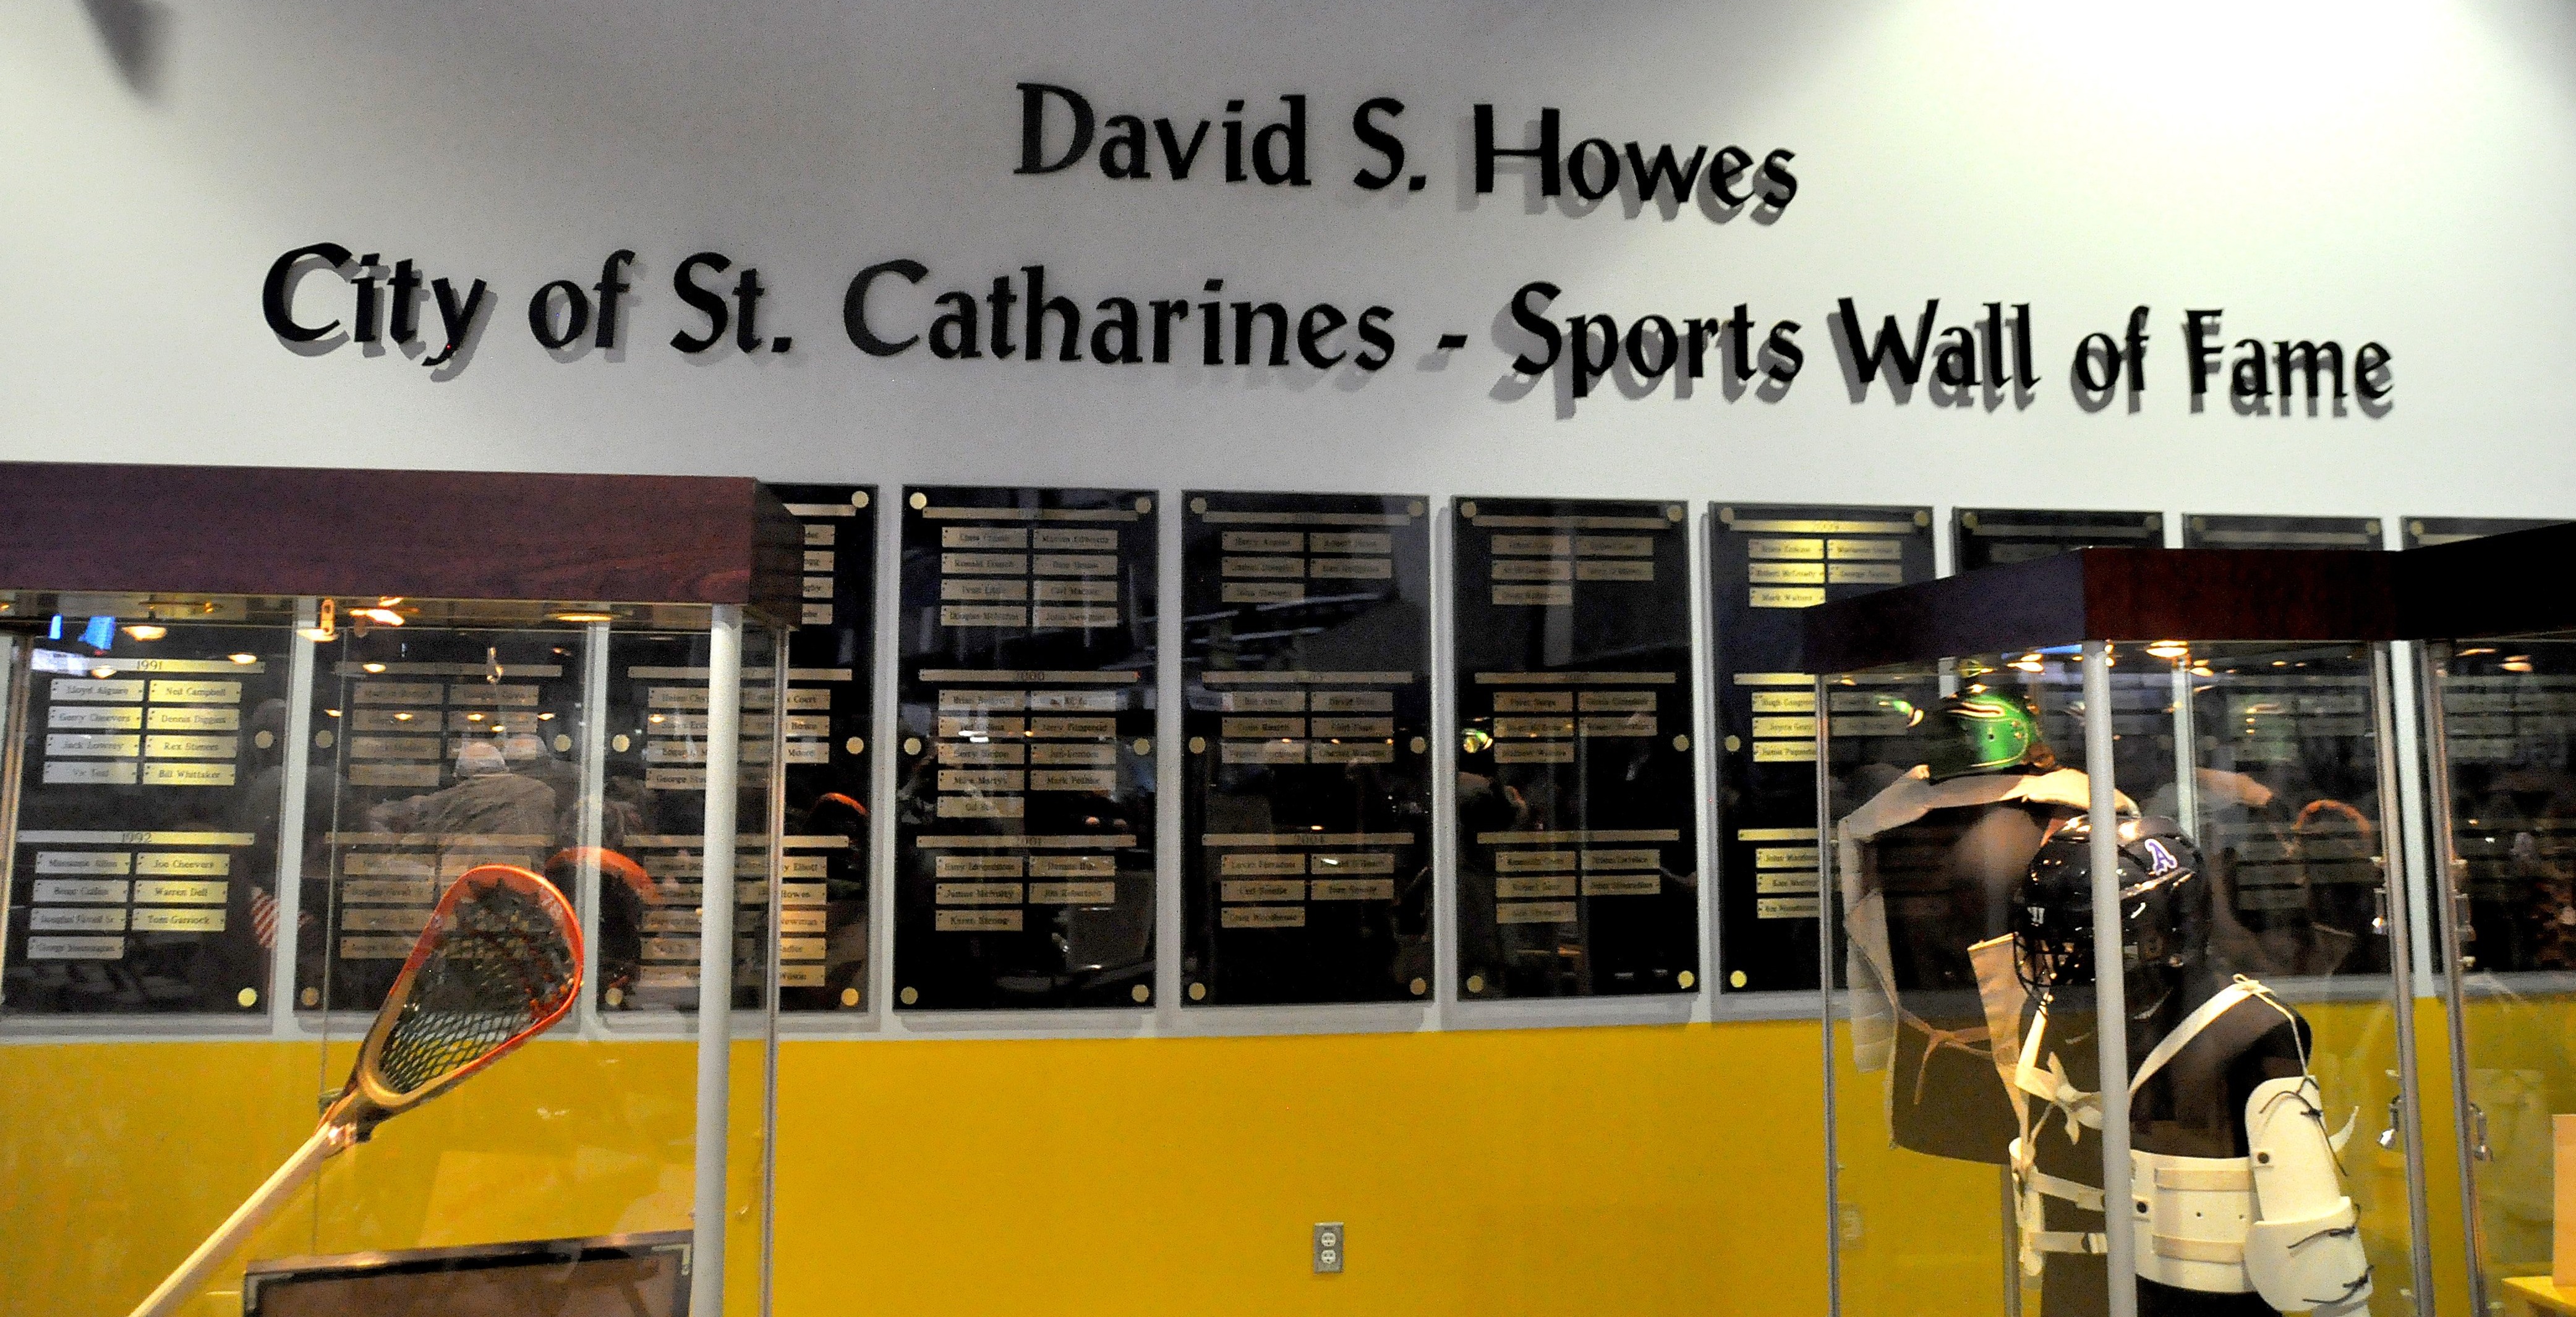 St Catharines Sports Hall of Fame, including the wall of fame